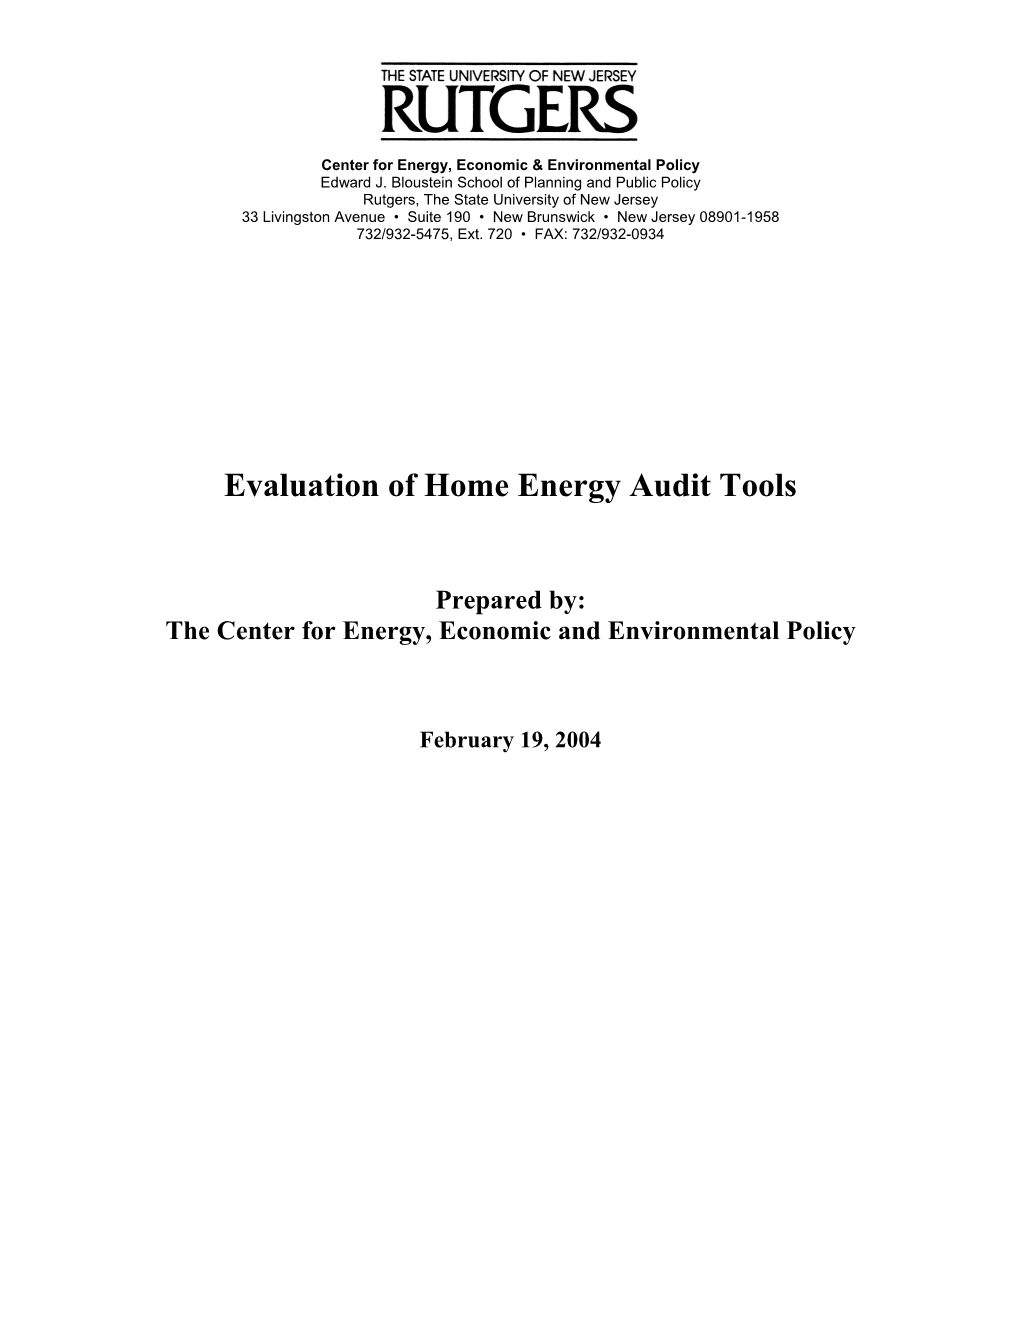 Evaluation of Home Energy Audit Tools